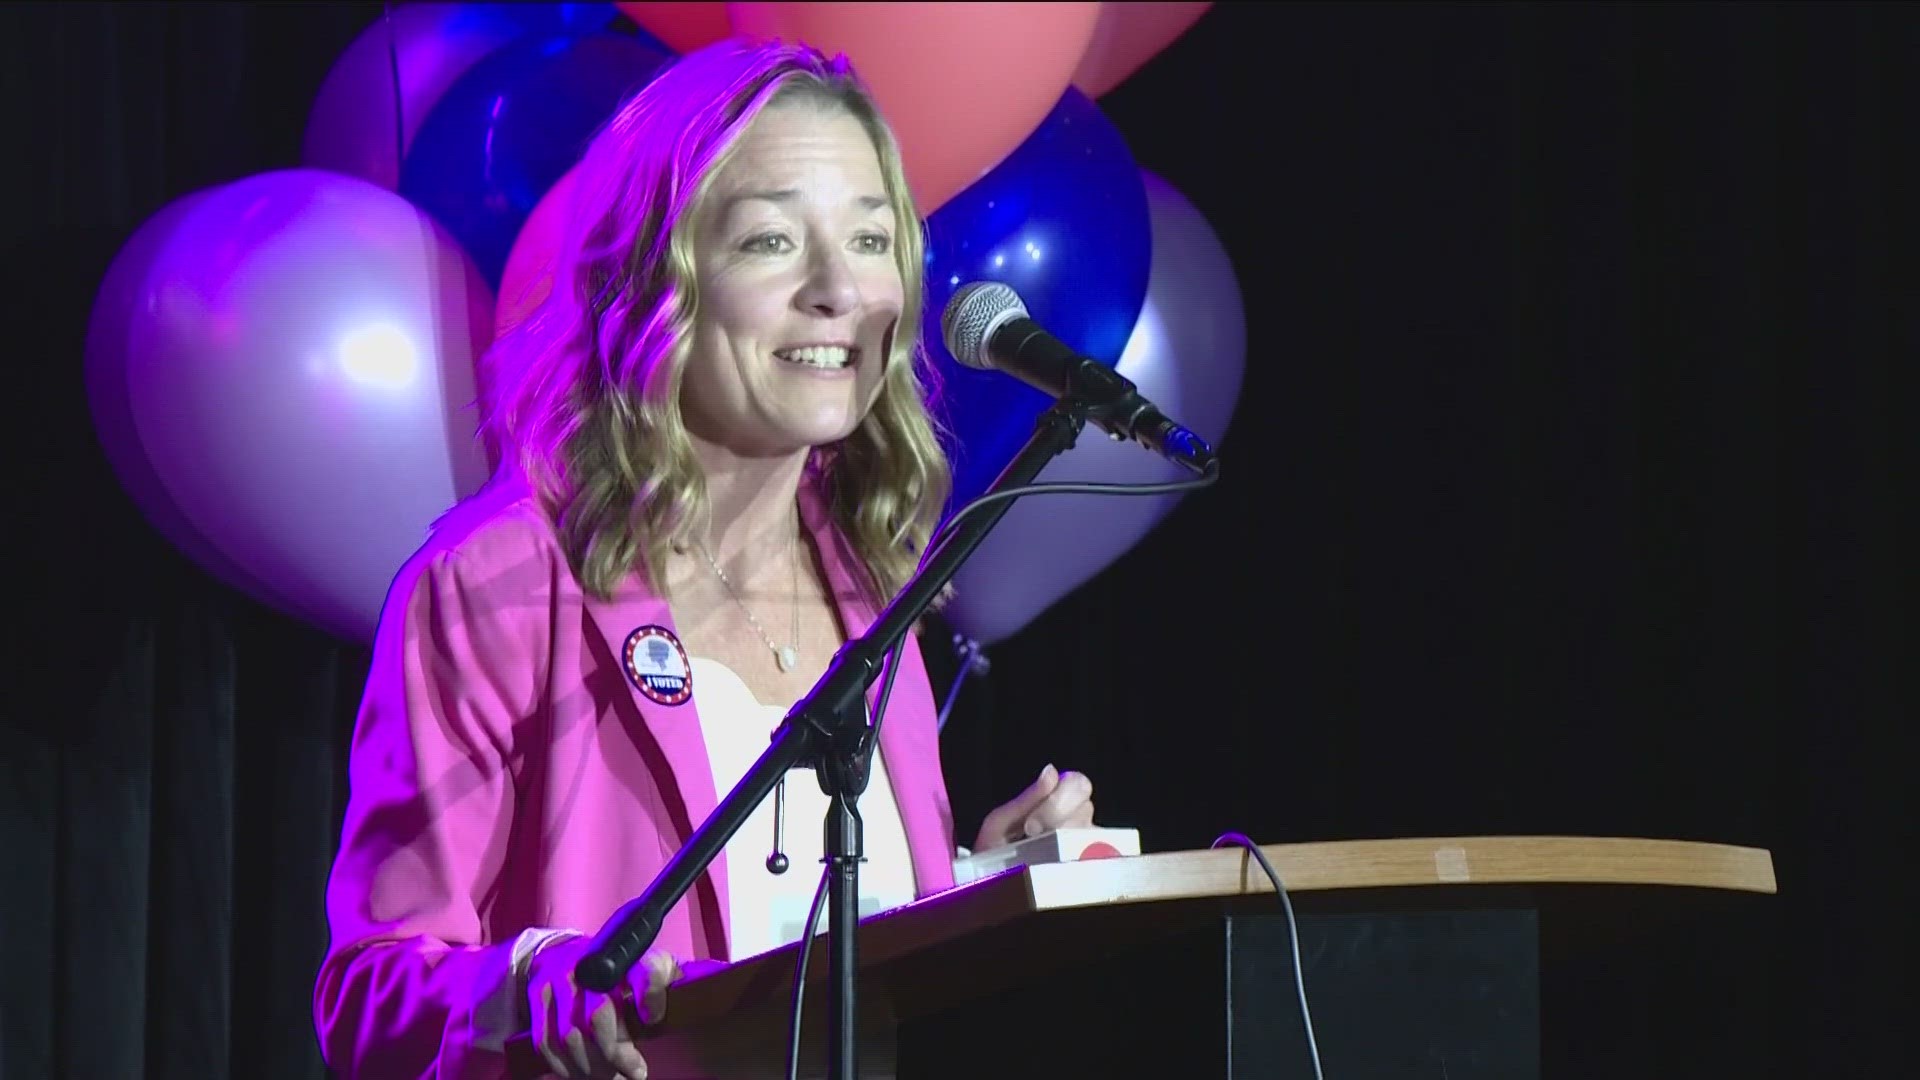 Boise's mayoral race comes to an end, with Lauren McLean re-elected for her second term.